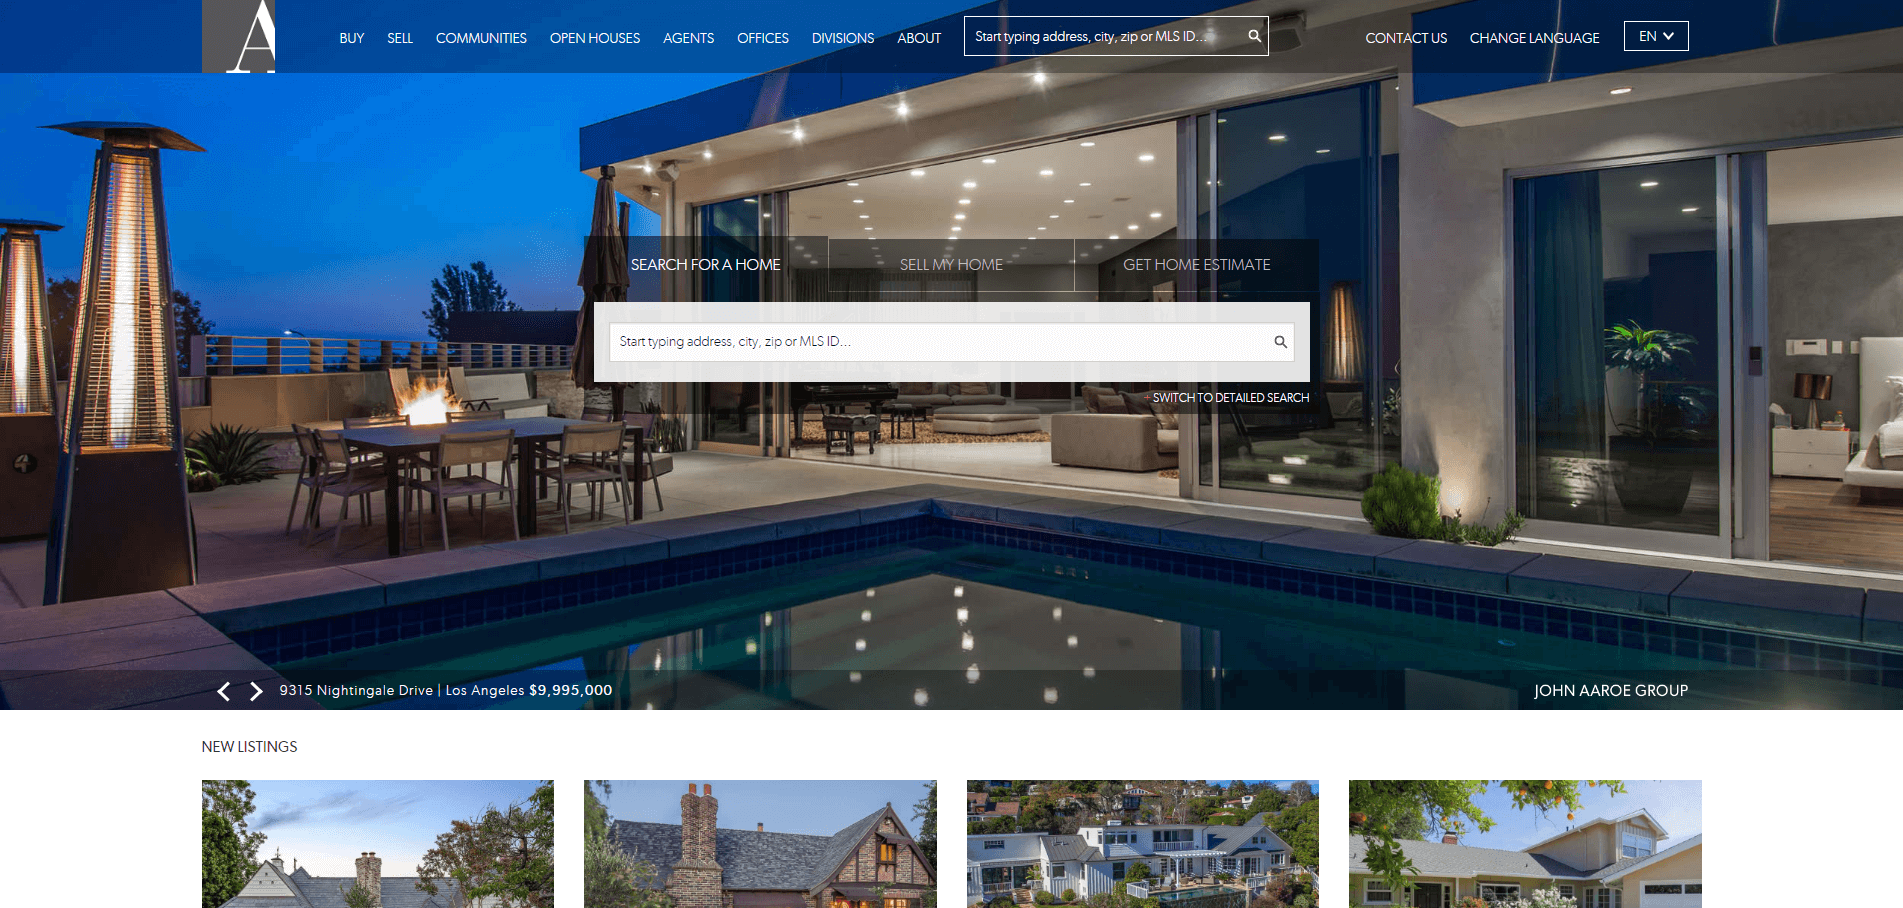  Check this out!  We made a list of the 101 best real estate websites.  We reviewed each site and ranked them 1-101.  Here's aaroe.com.  Curious who made the cut? 